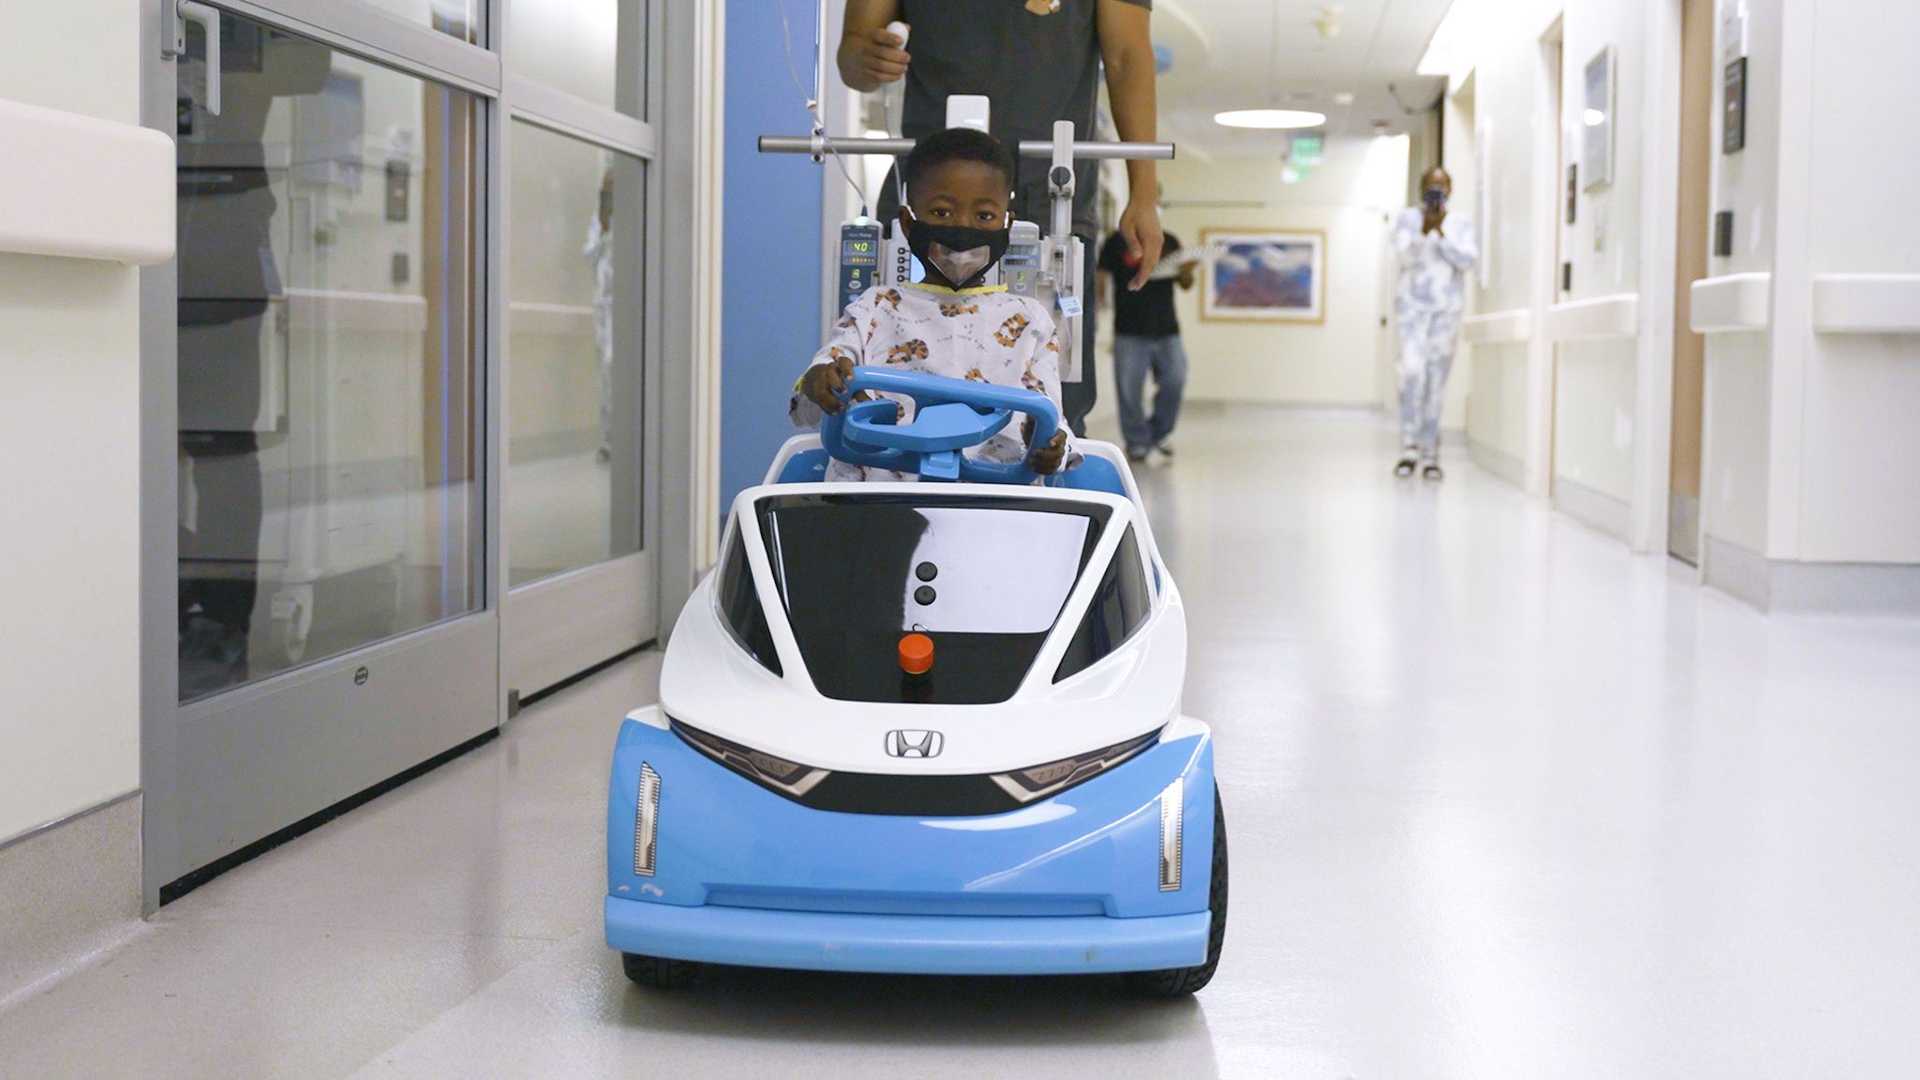 Honda has given the children in the hospitals a reason to be happy with her Shogo